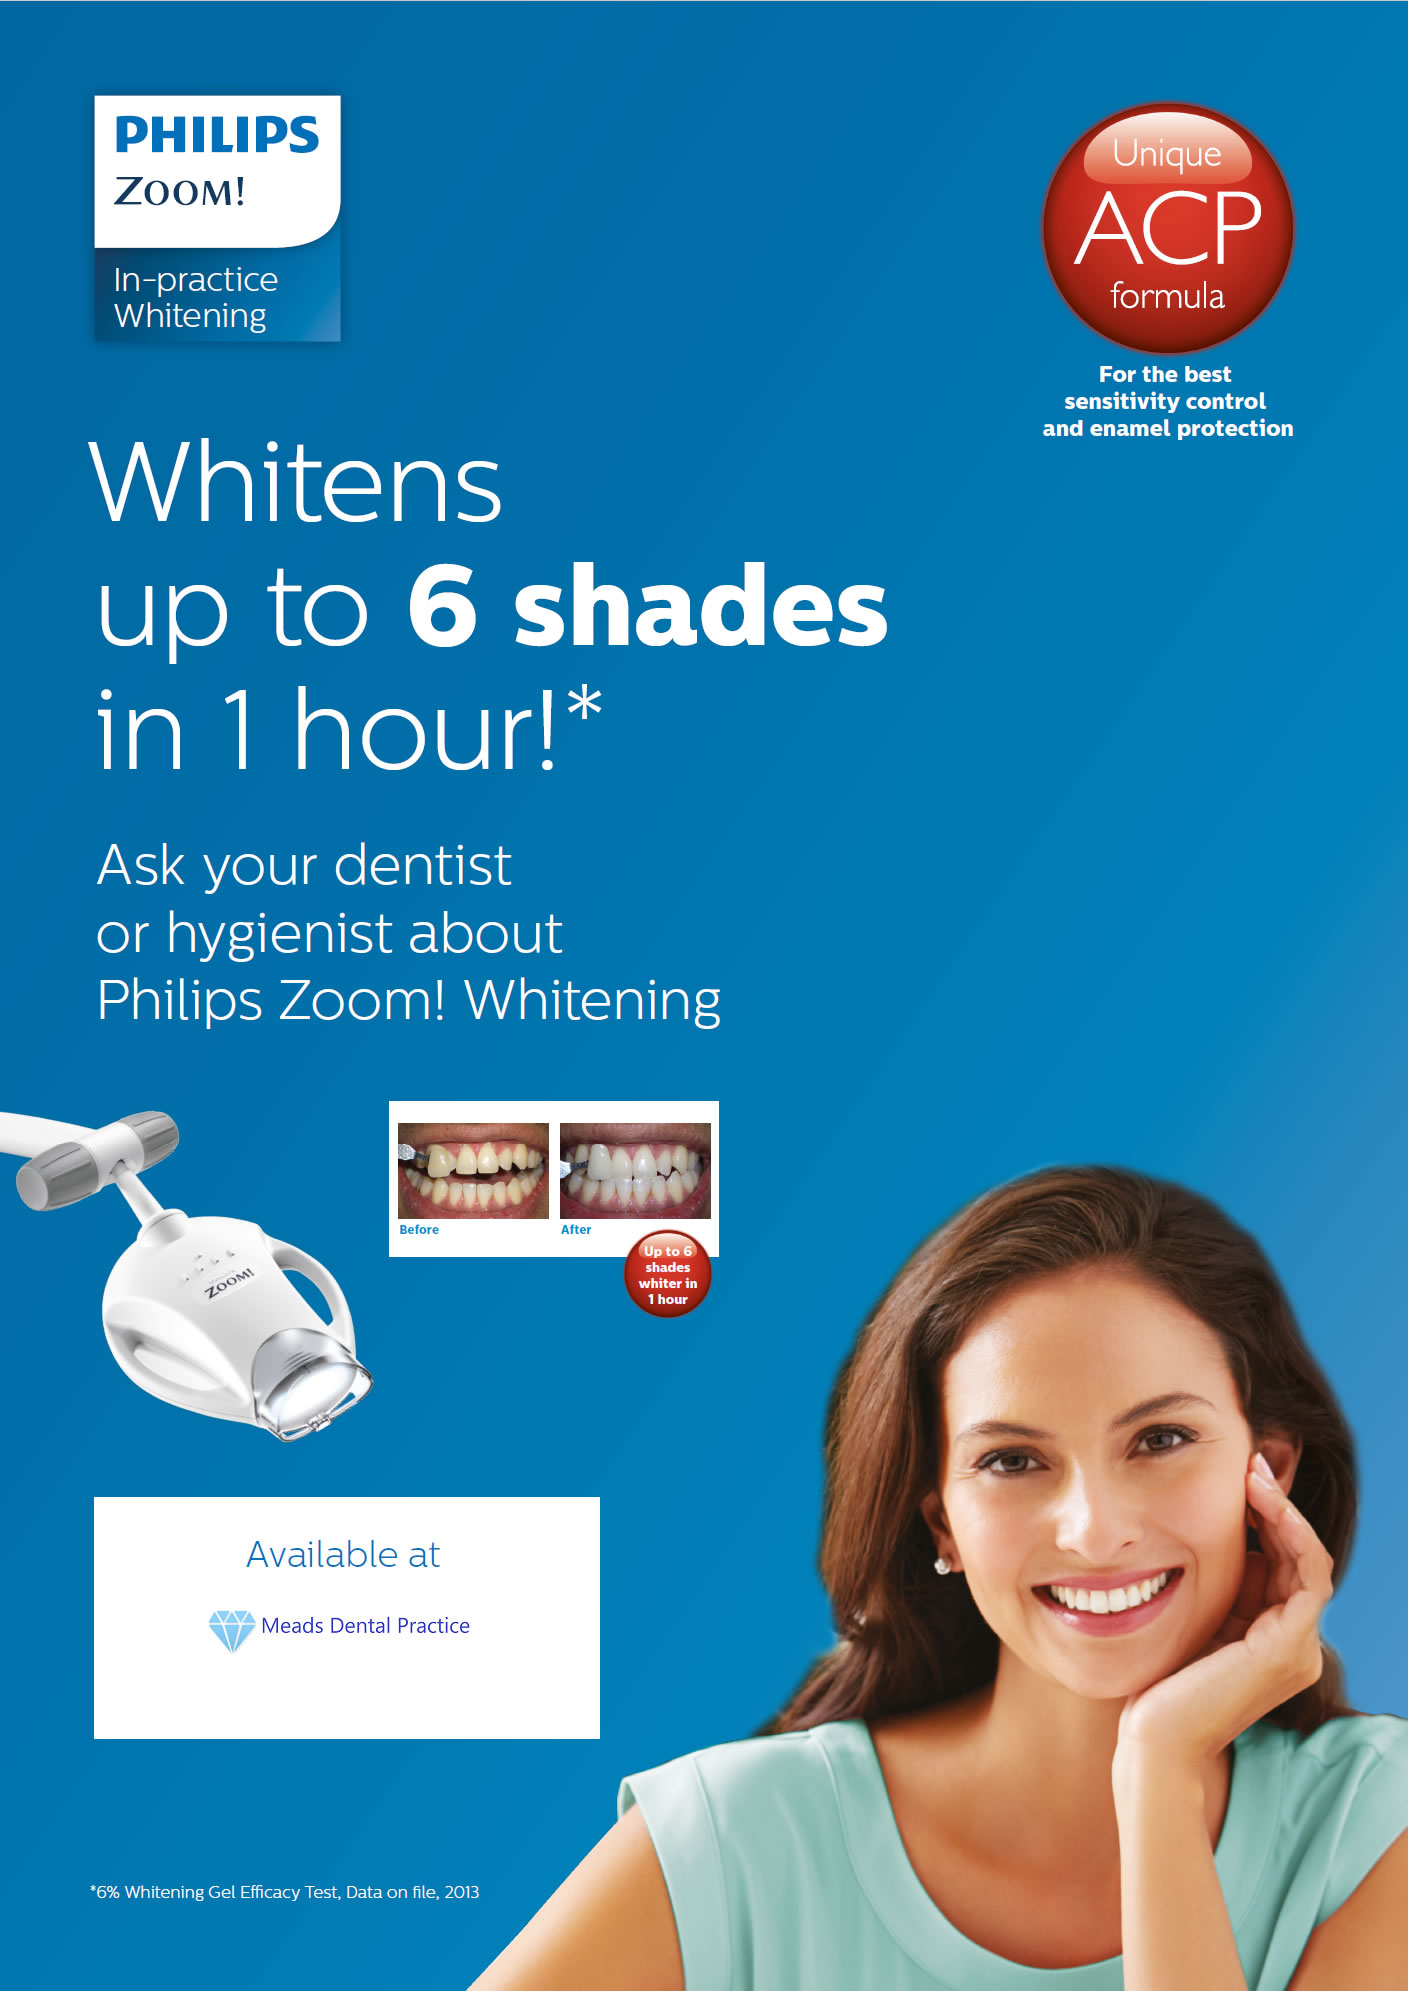 philips-zoom-teeth-whitening-system-meads-dental-practice